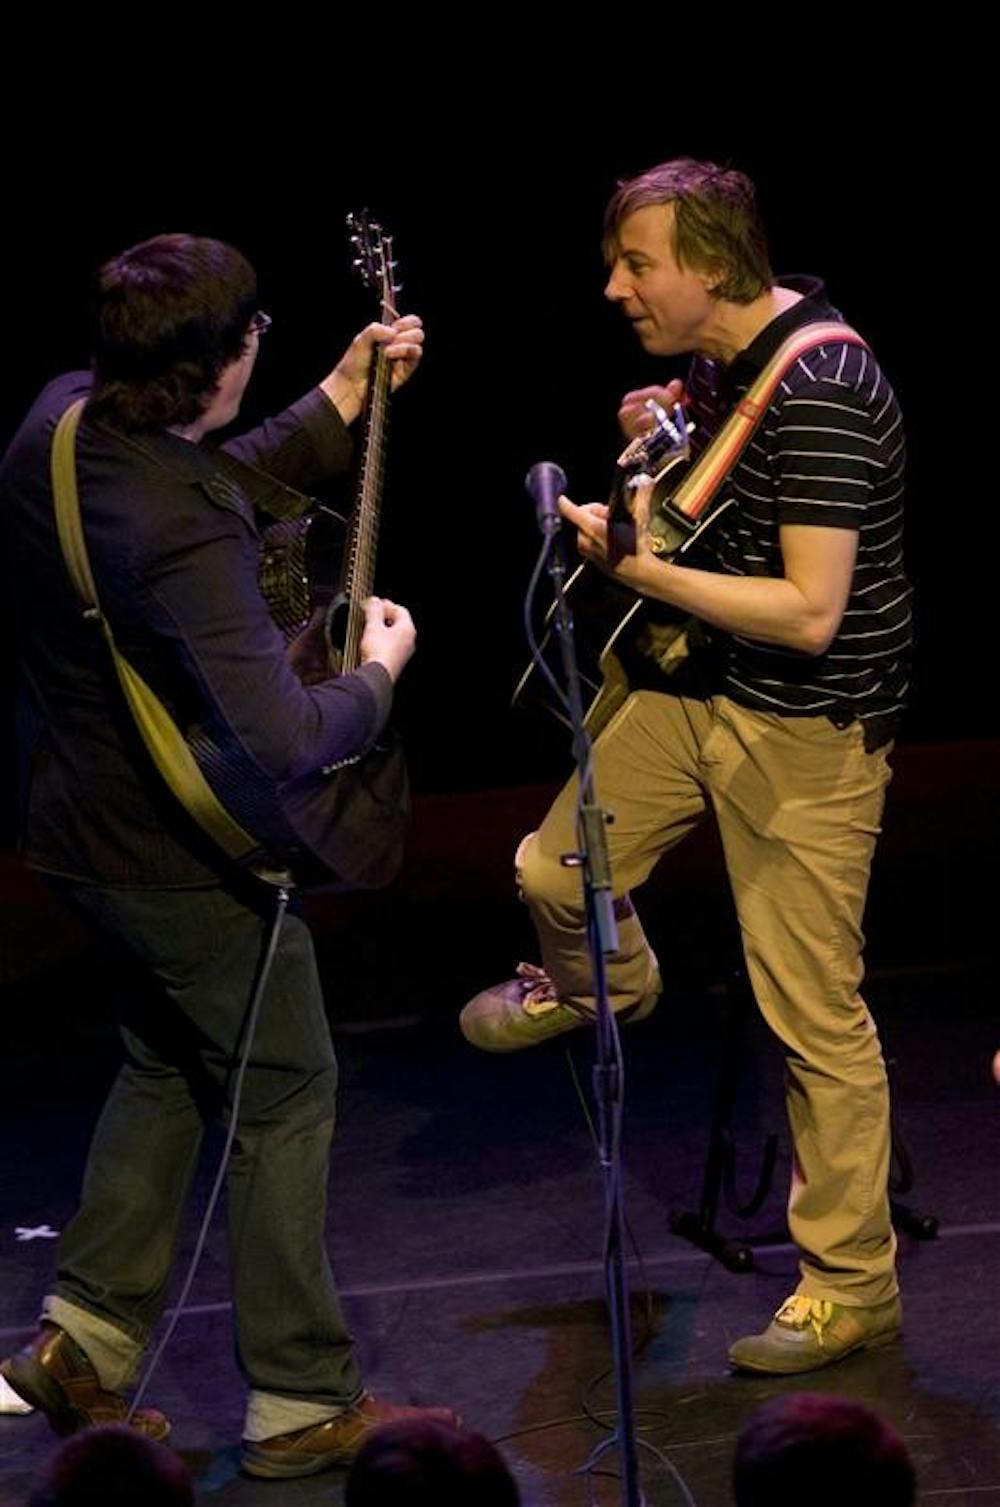 The Mountain Goats accompanied by John Vanderslice perform songs from their album Heretic Pride at the Buskirk-Chumley Theater on April 8, 2009.&nbsp;